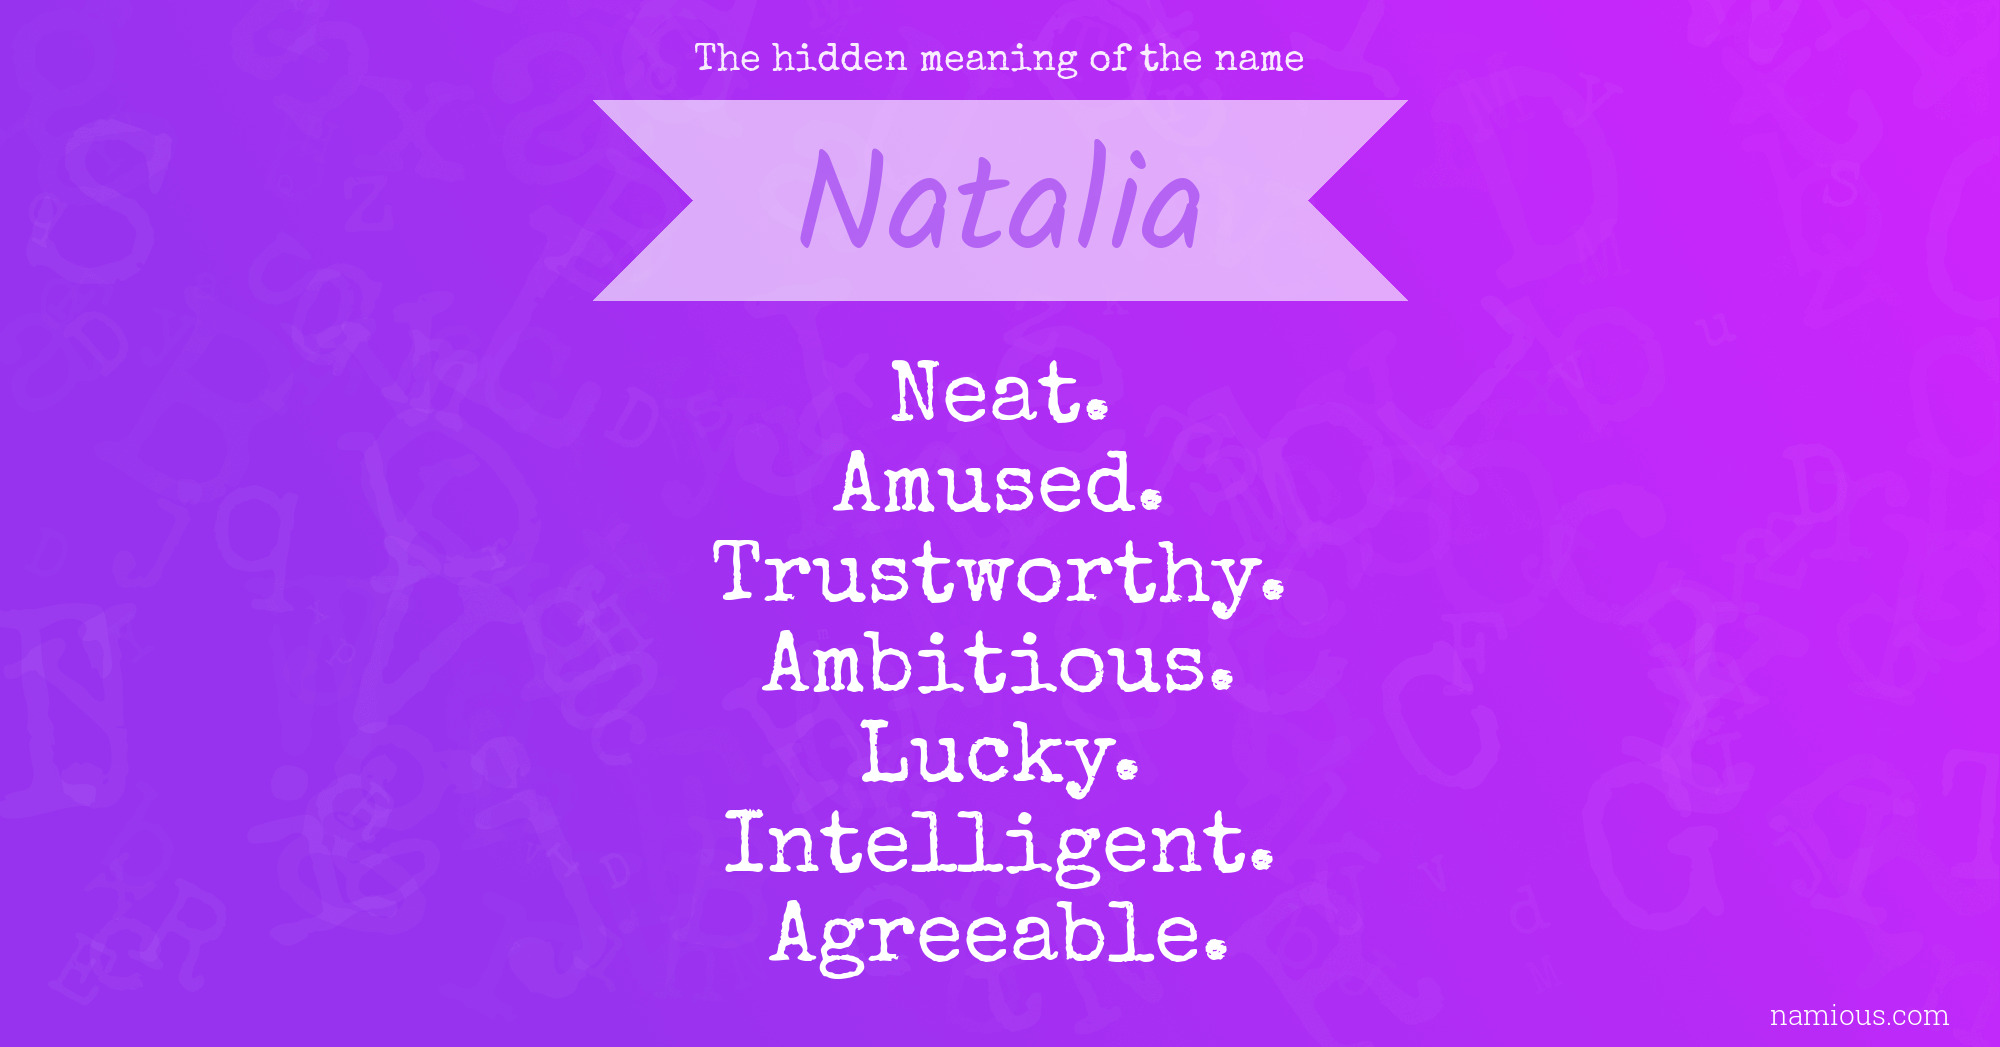 The hidden meaning of the name Natalia